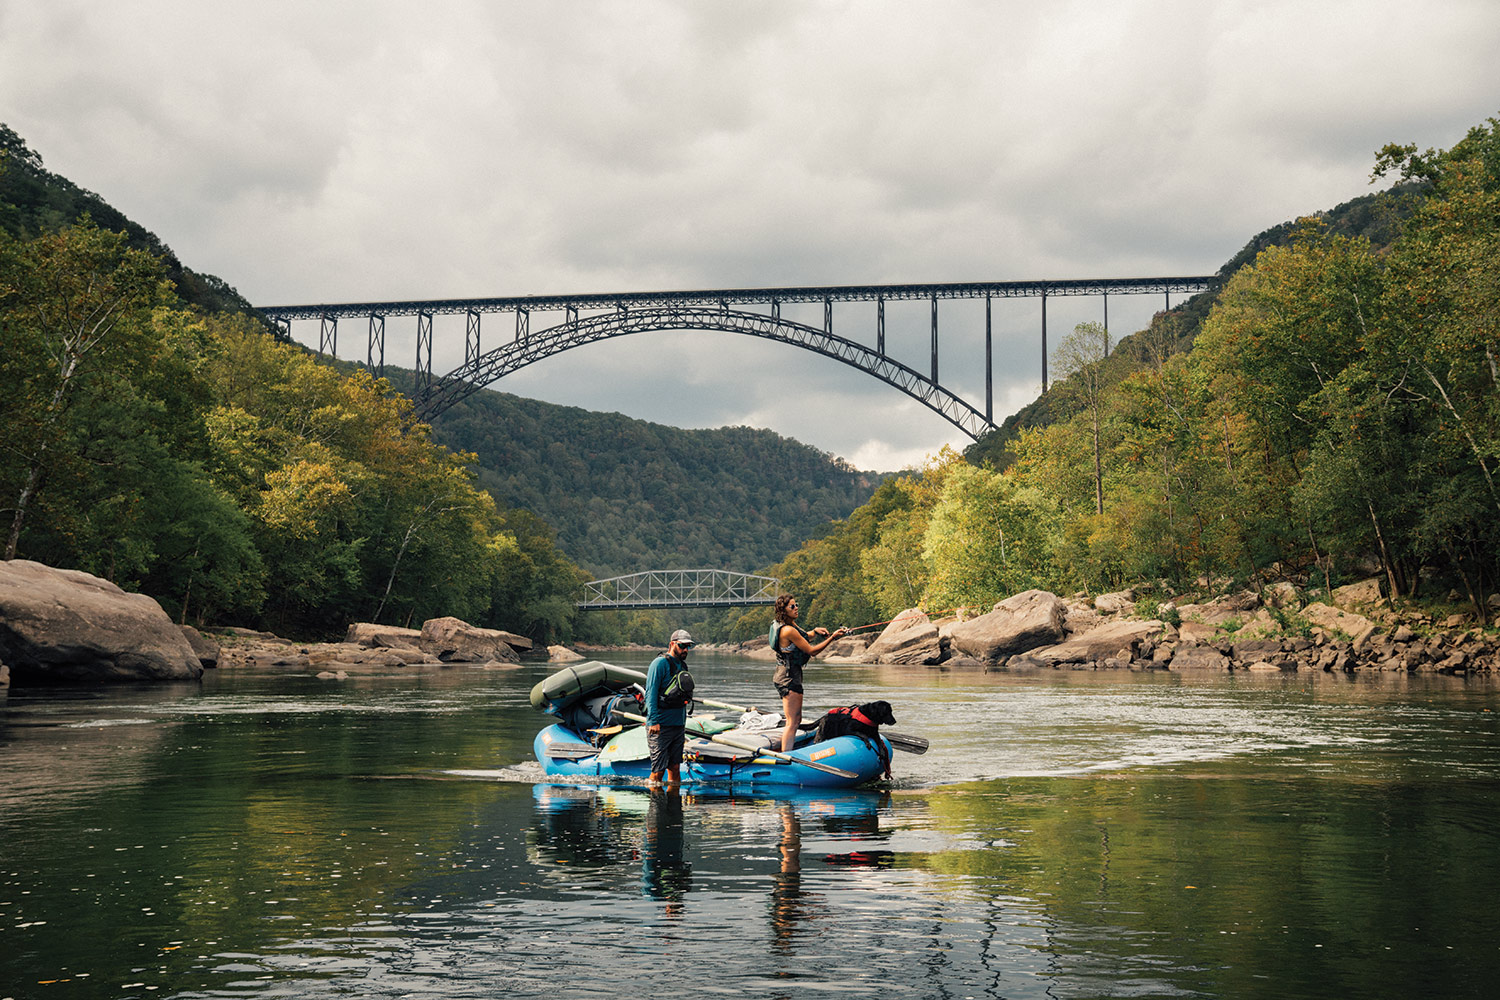 Anglers cast into river in front of New River Gorge Bridge.